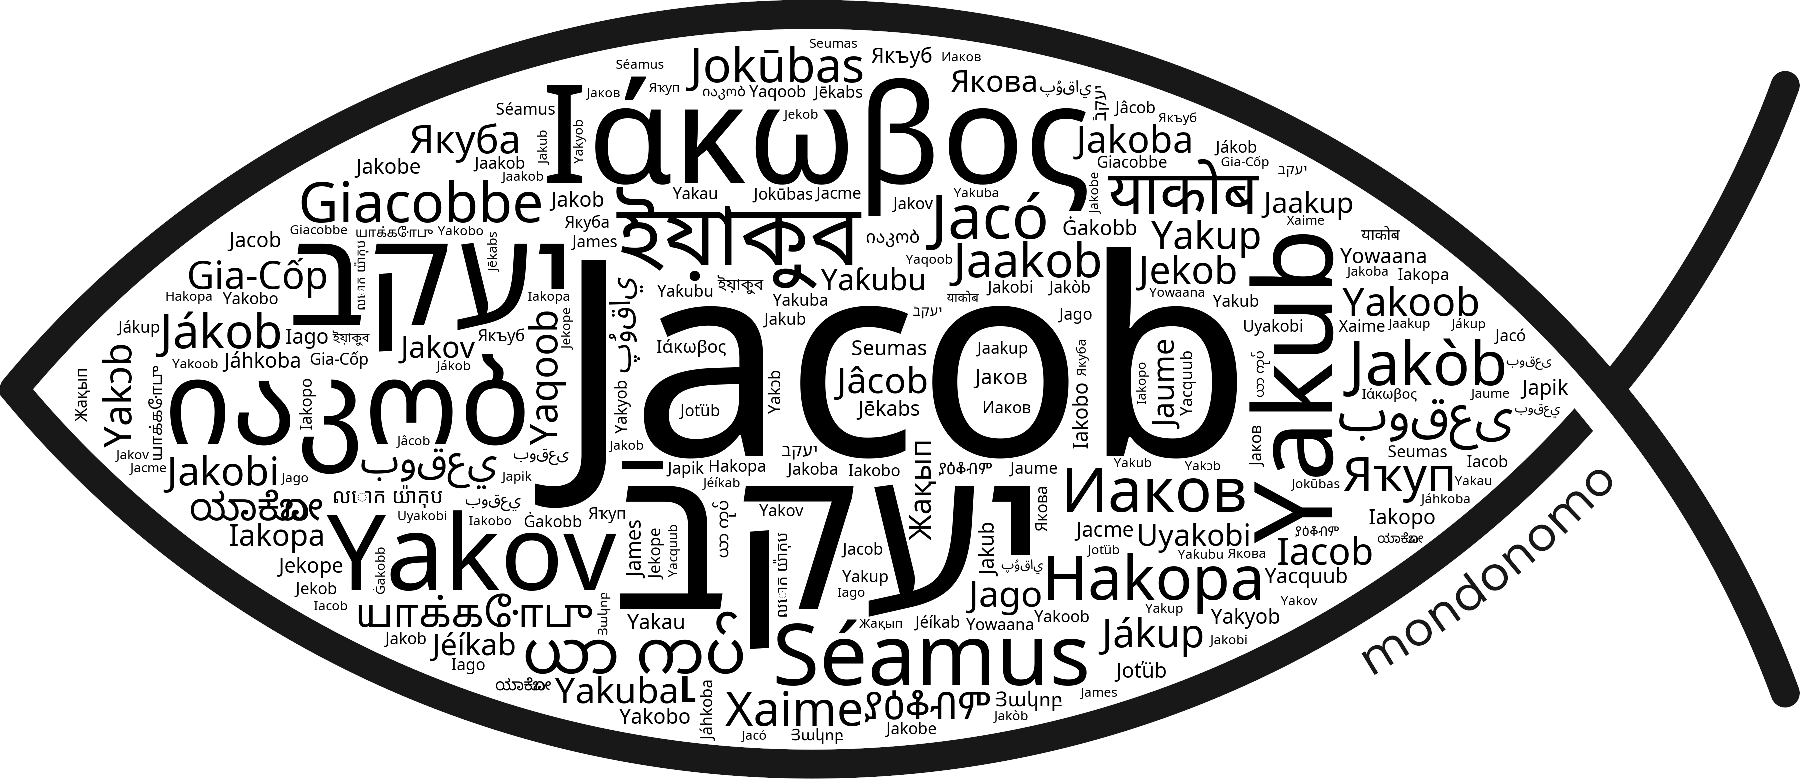 Name Jacob in the world's Bibles